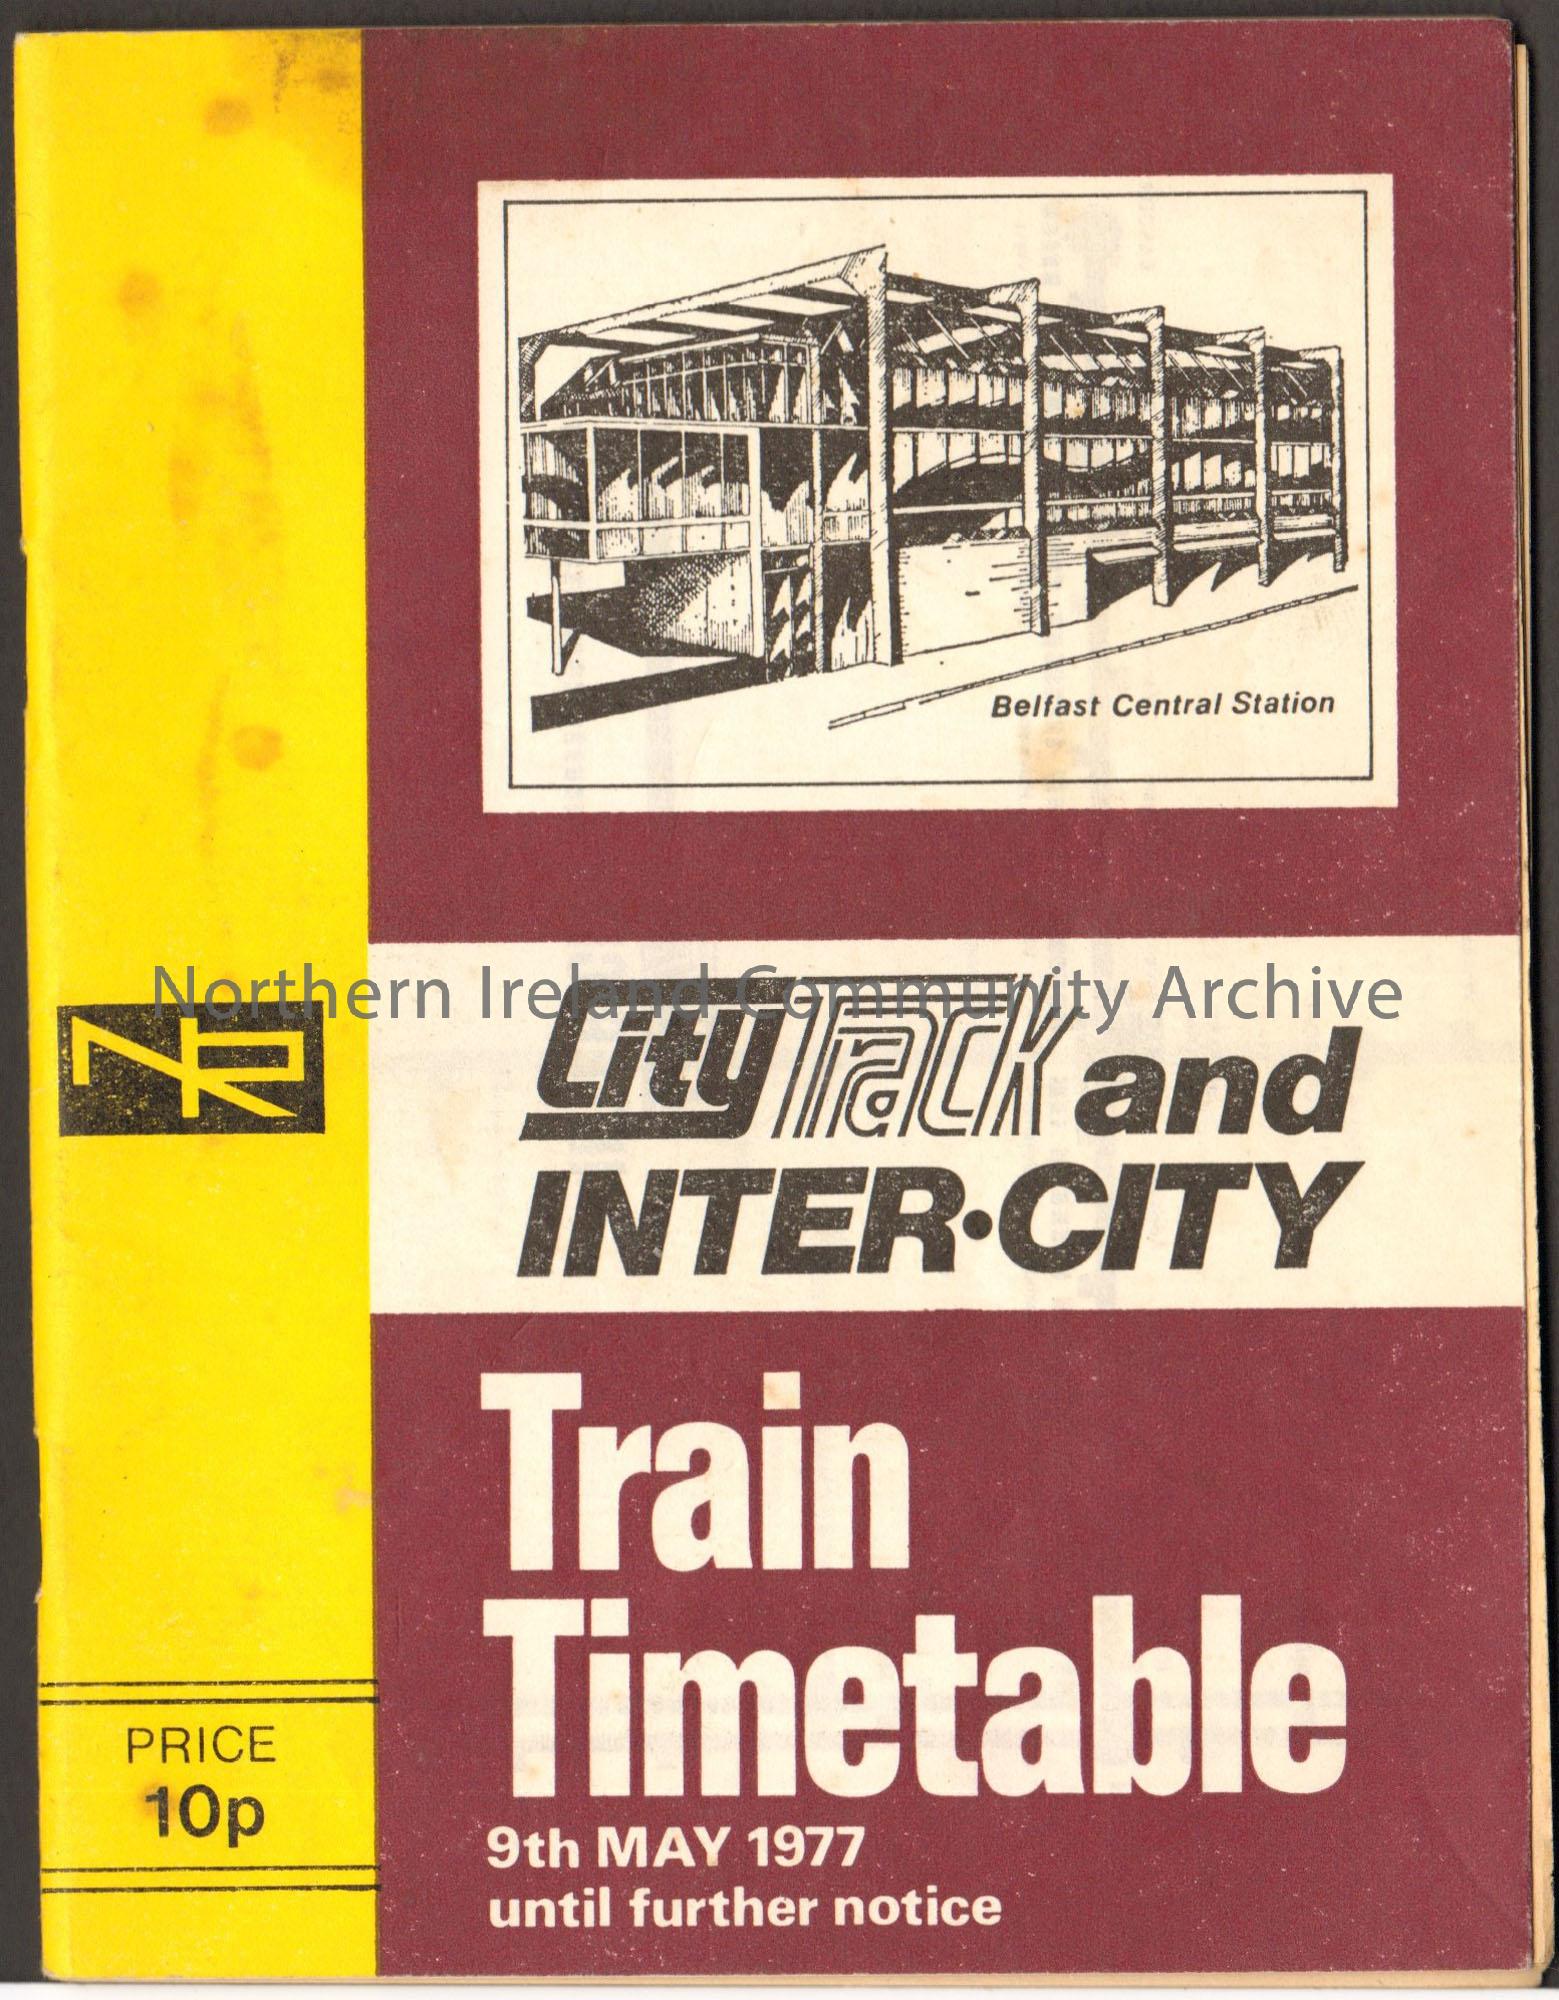 City track and inter-city train timetable. 9th May 1977 until further notice.